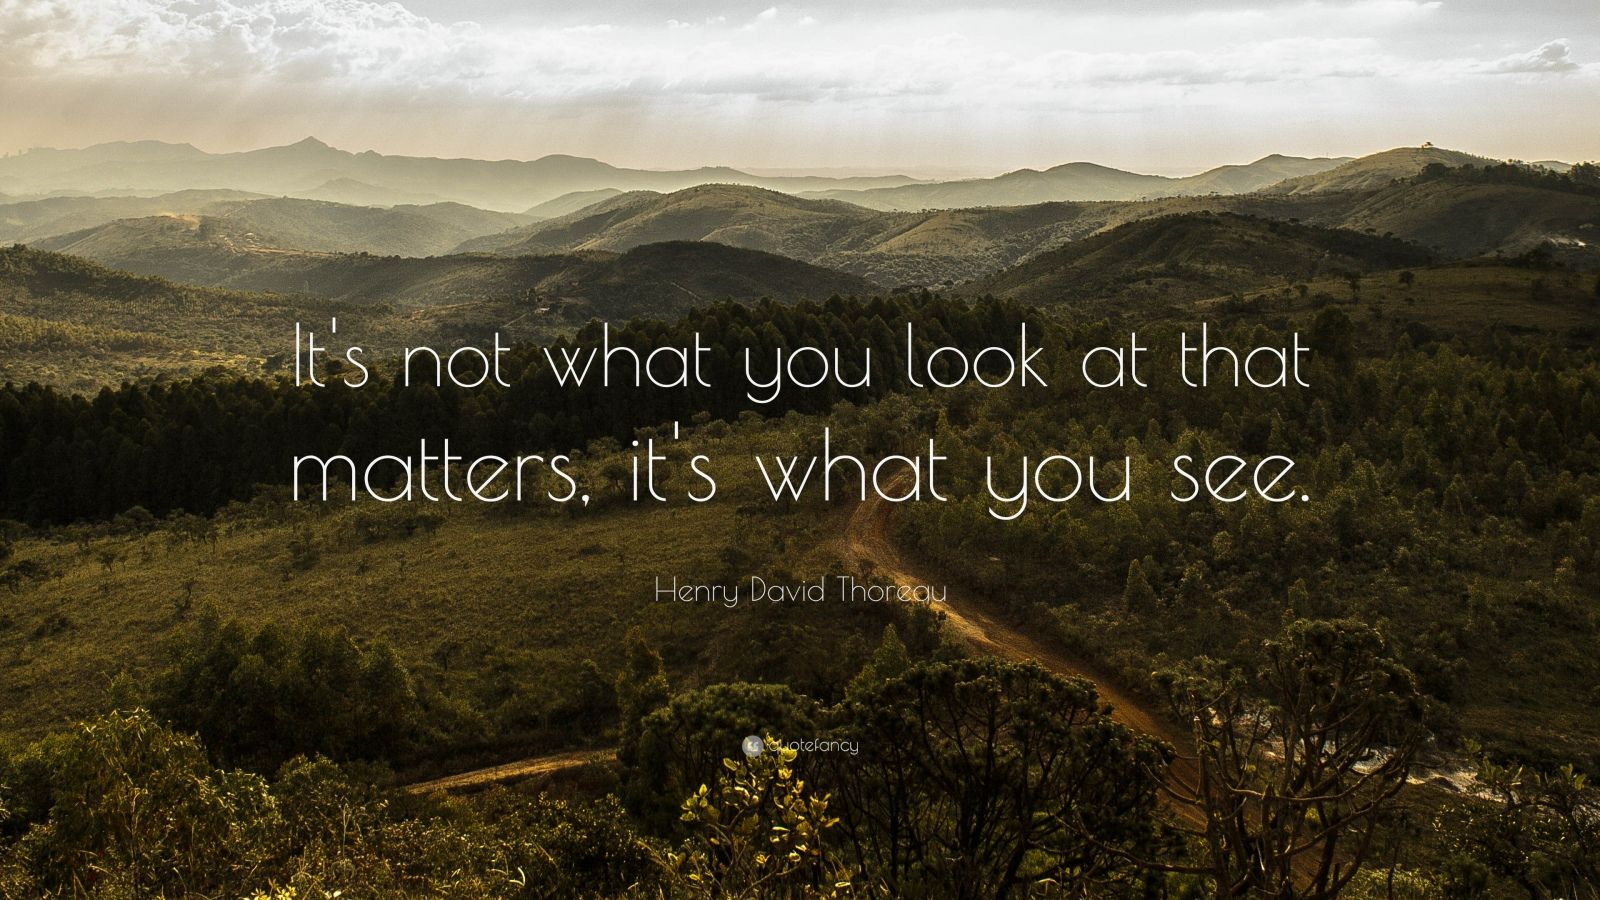 11009-Henry-David-Thoreau-Quote-It-s-not-what-you-look-at-that-matters.jpg